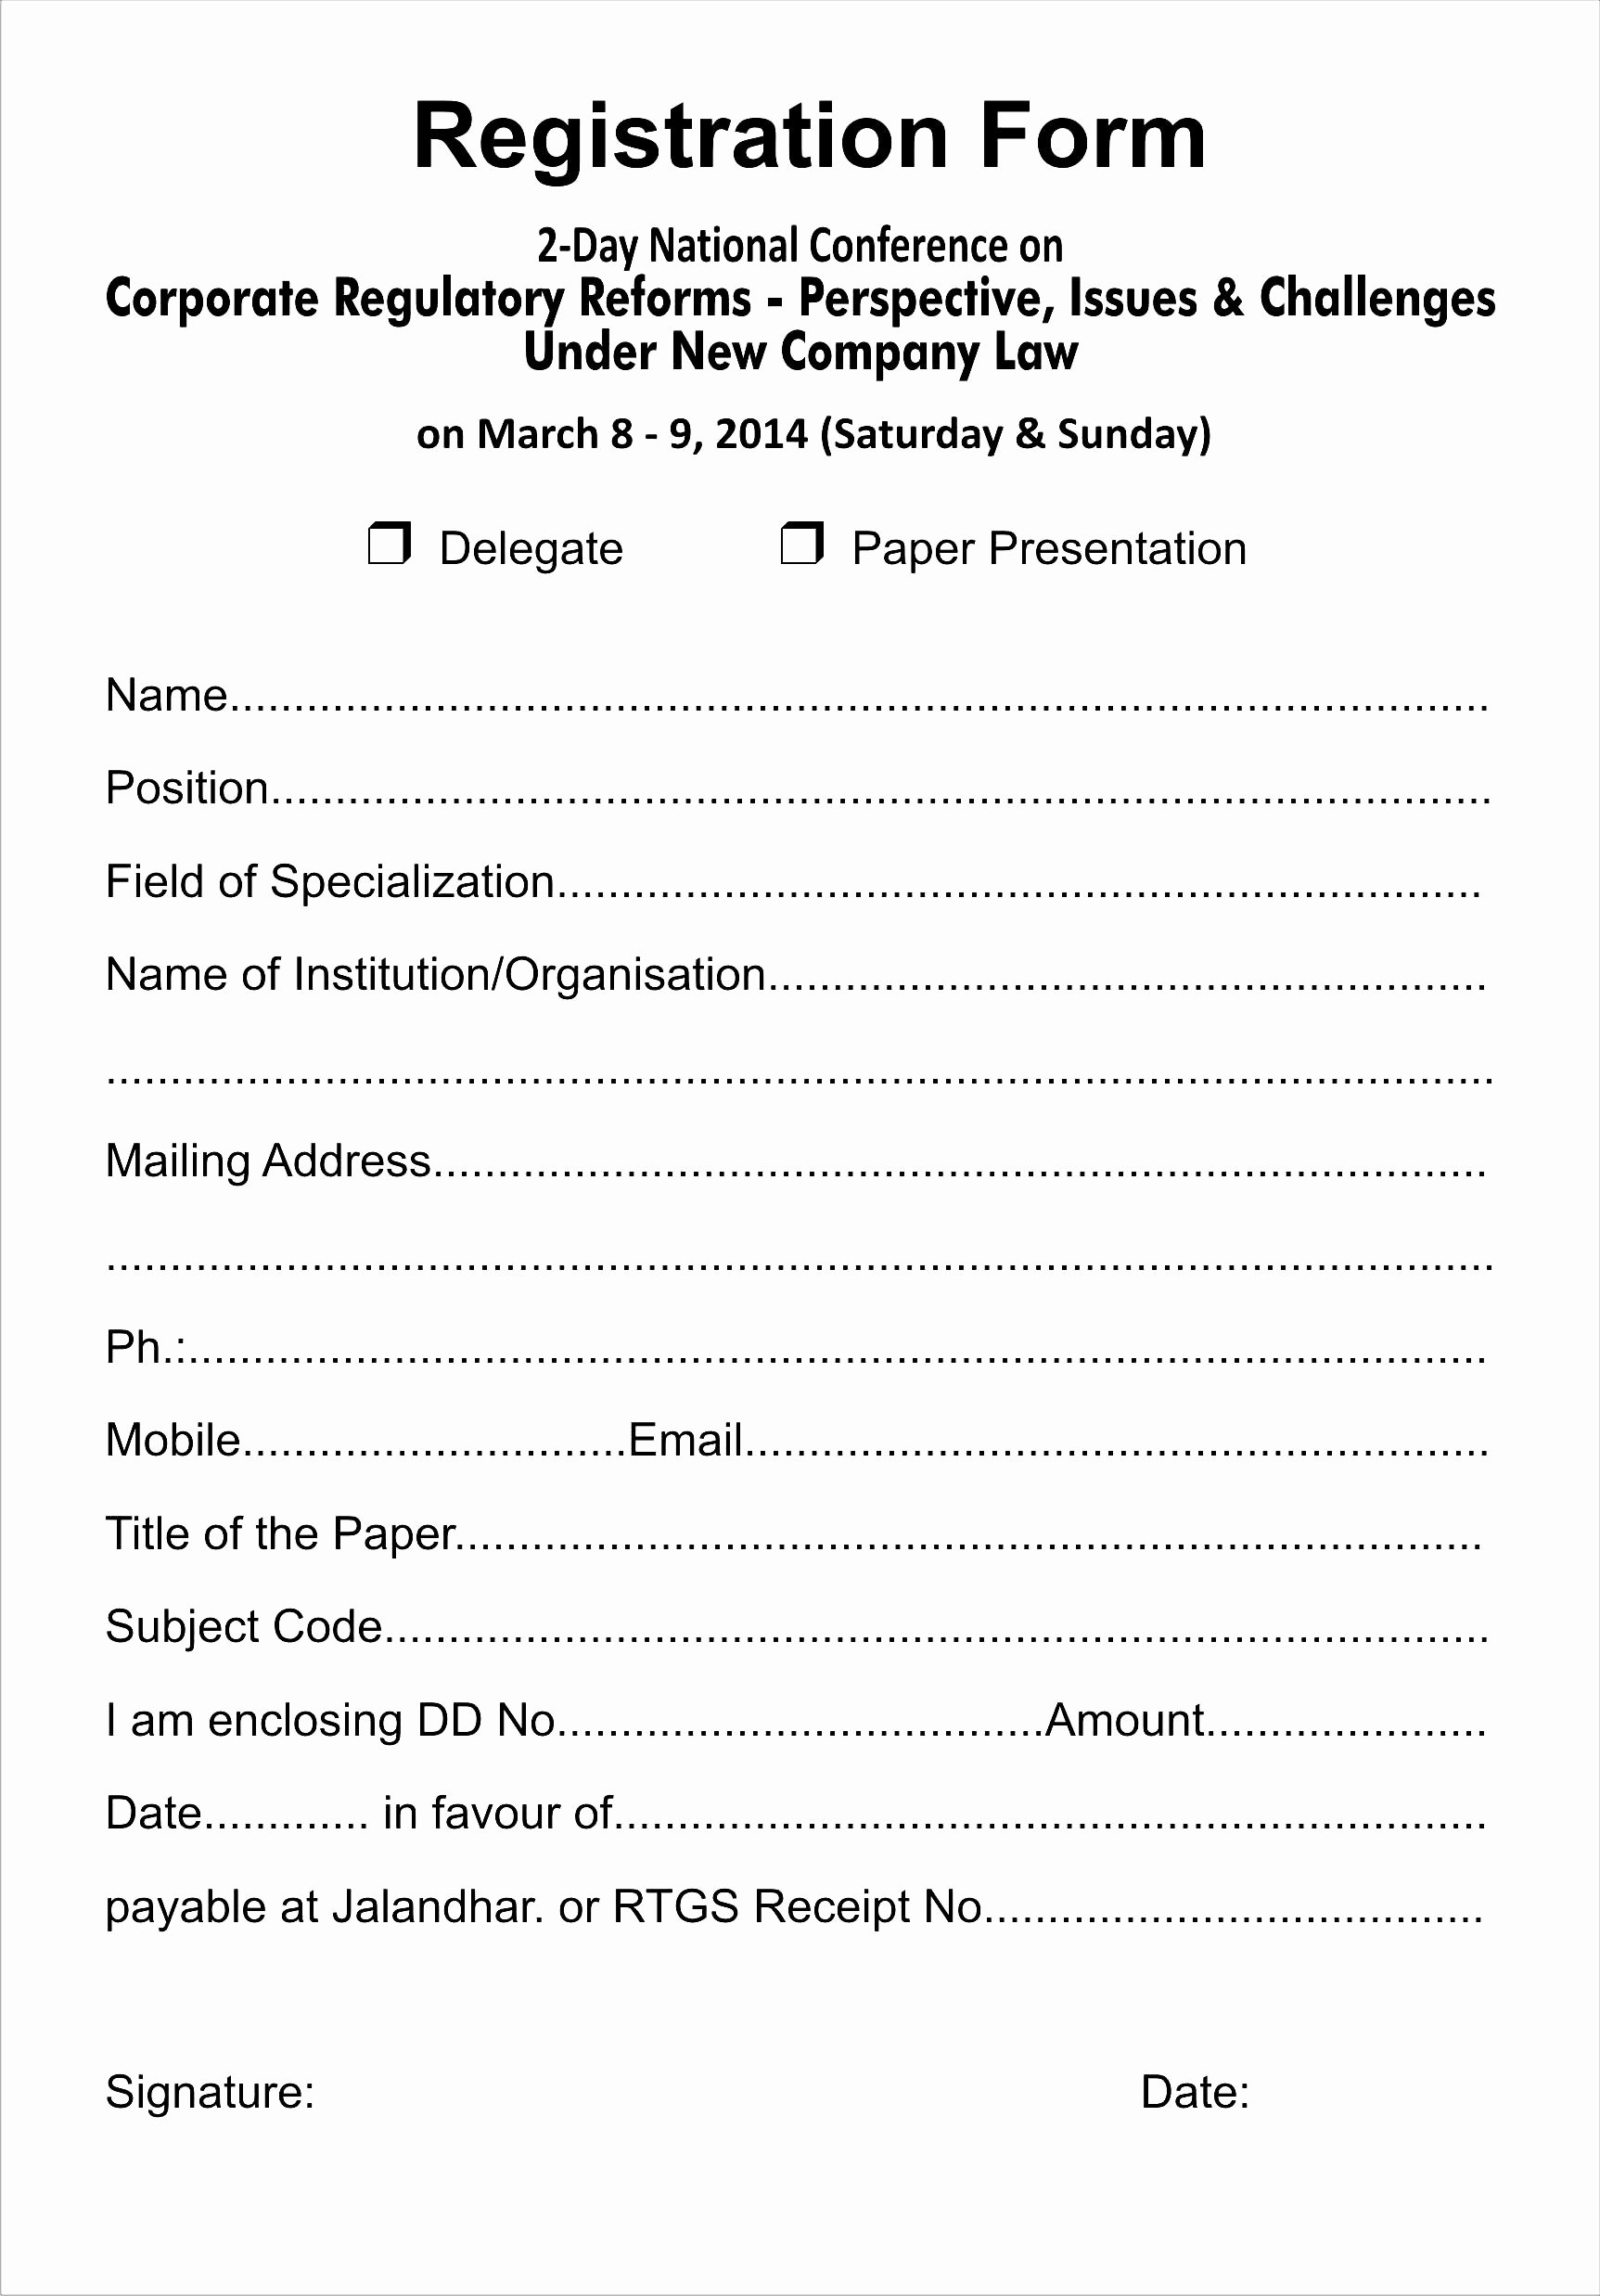 Registration form Template Word Beautiful event Registration form Template Word Bamboodownunder